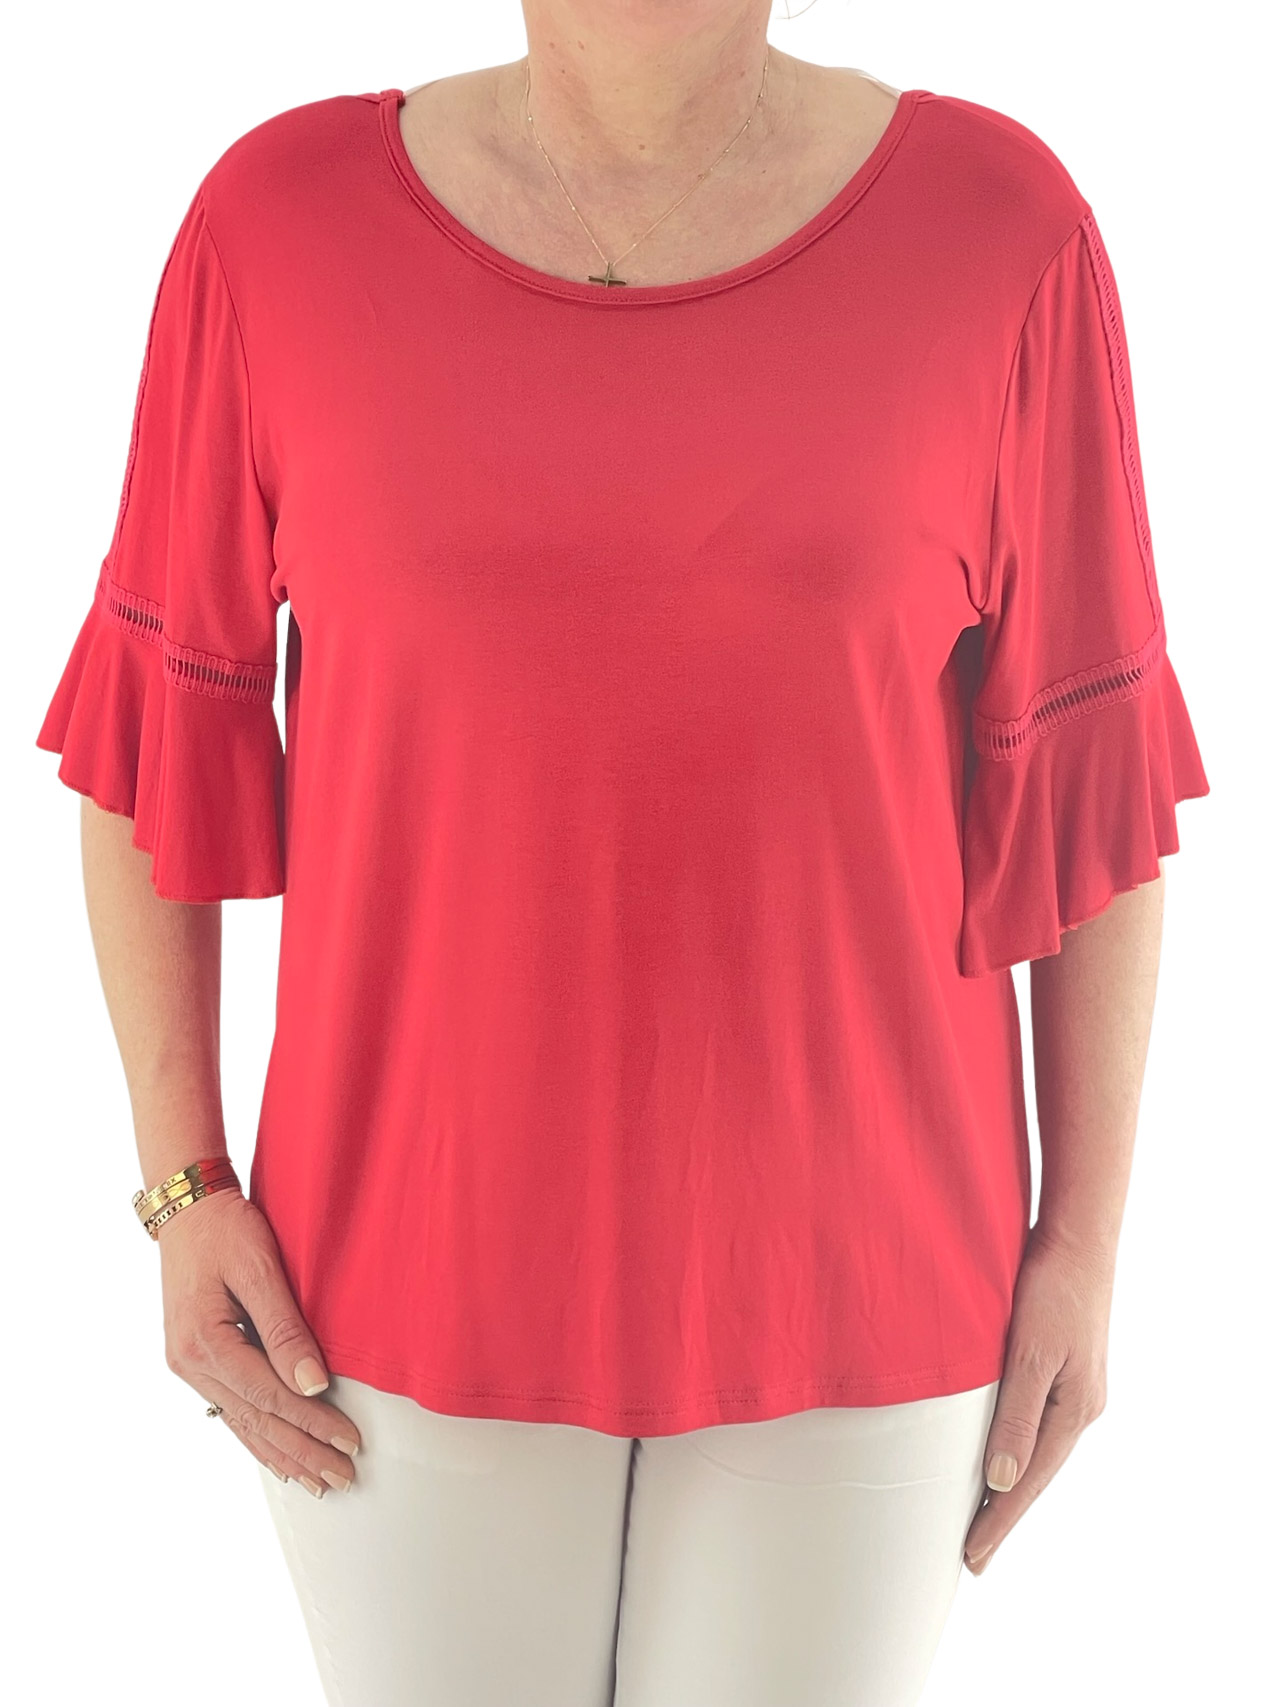 Women's blouse with ruffle sleeves code 123041